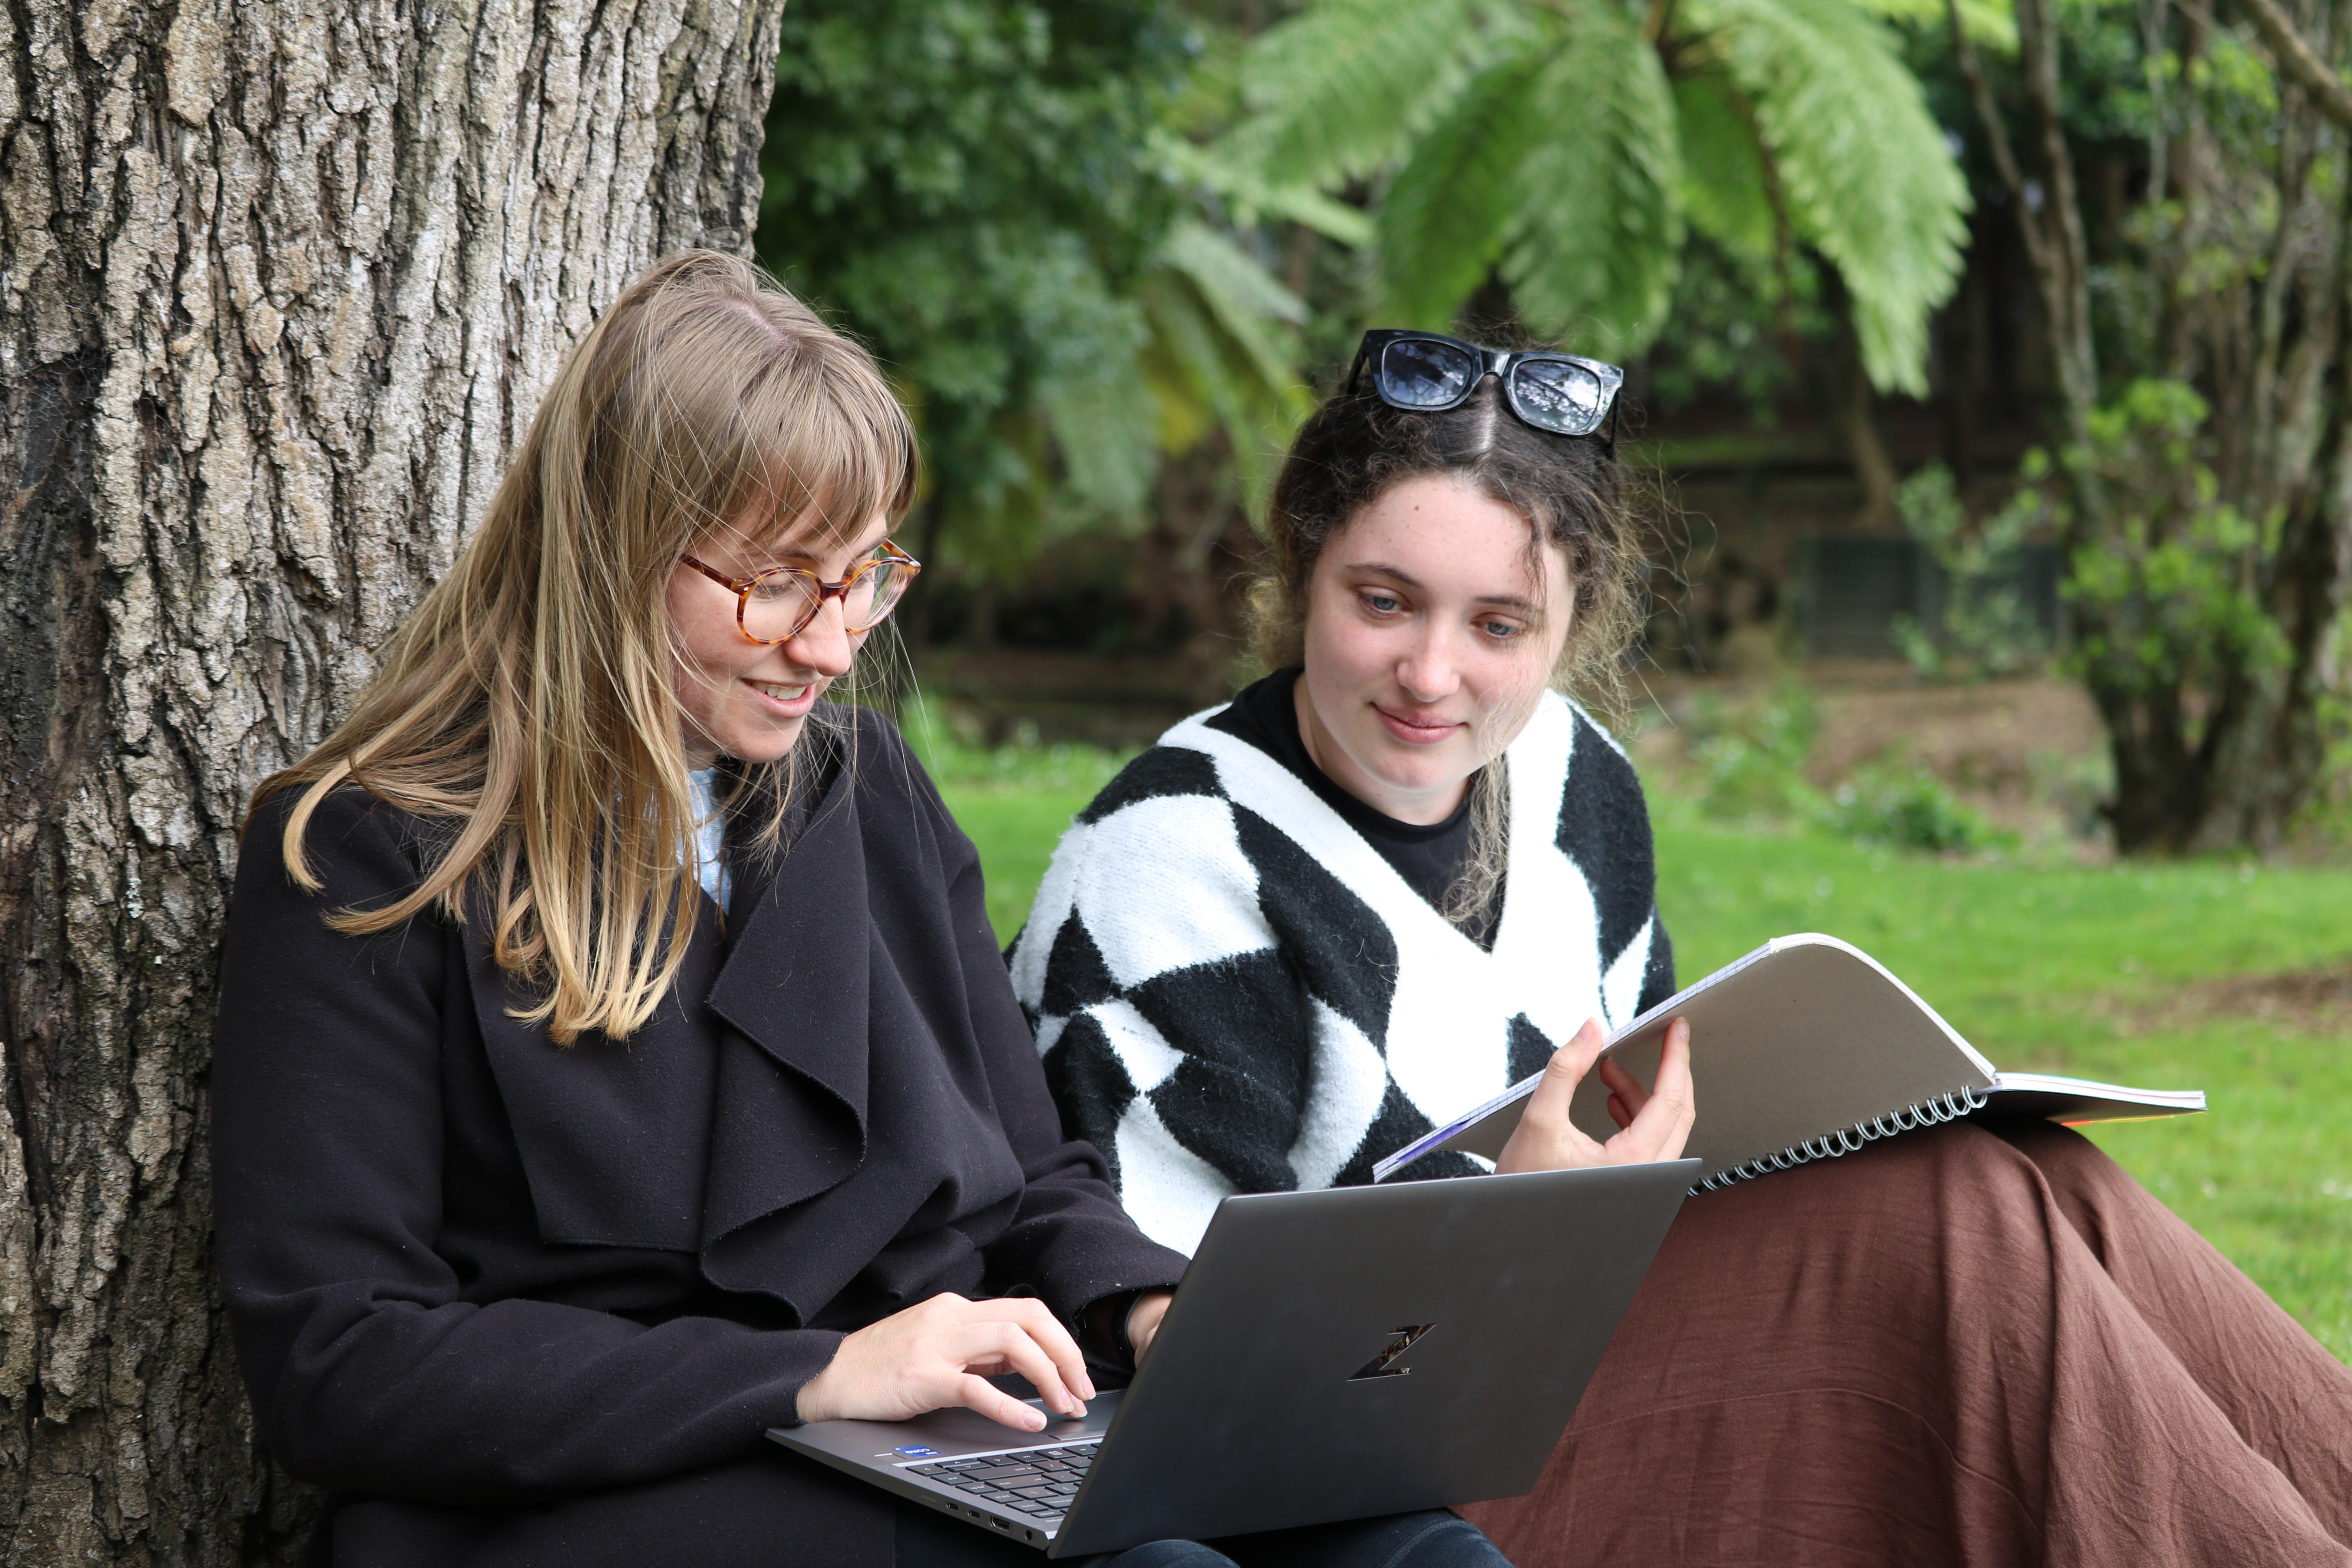 Applications have opened for six $4000 Tū i te ora Scholarships which will also include three months’ paid full-time work experience with Northland Regional Council.